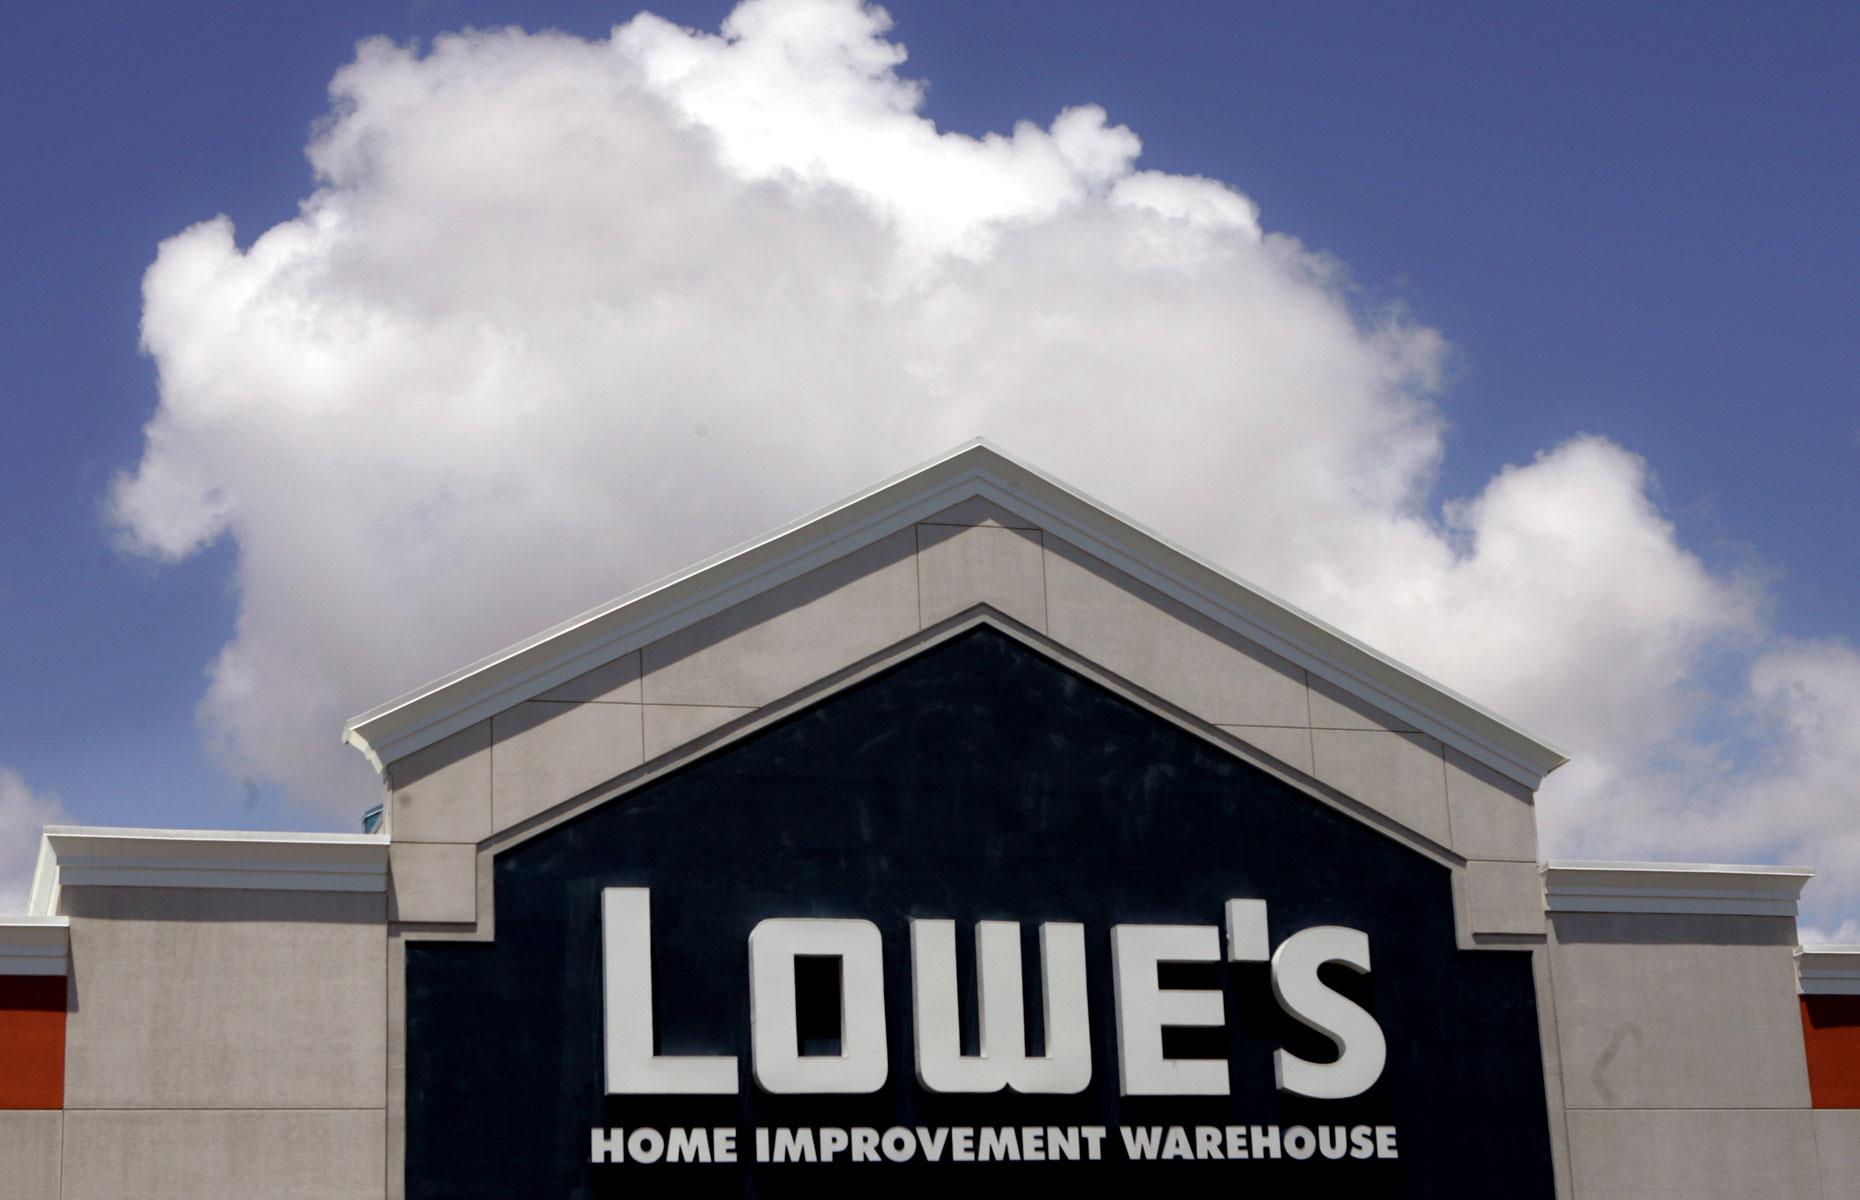 1961 – Lowe's: $1,000 invested then is worth $6.2 million (£4.2m) today